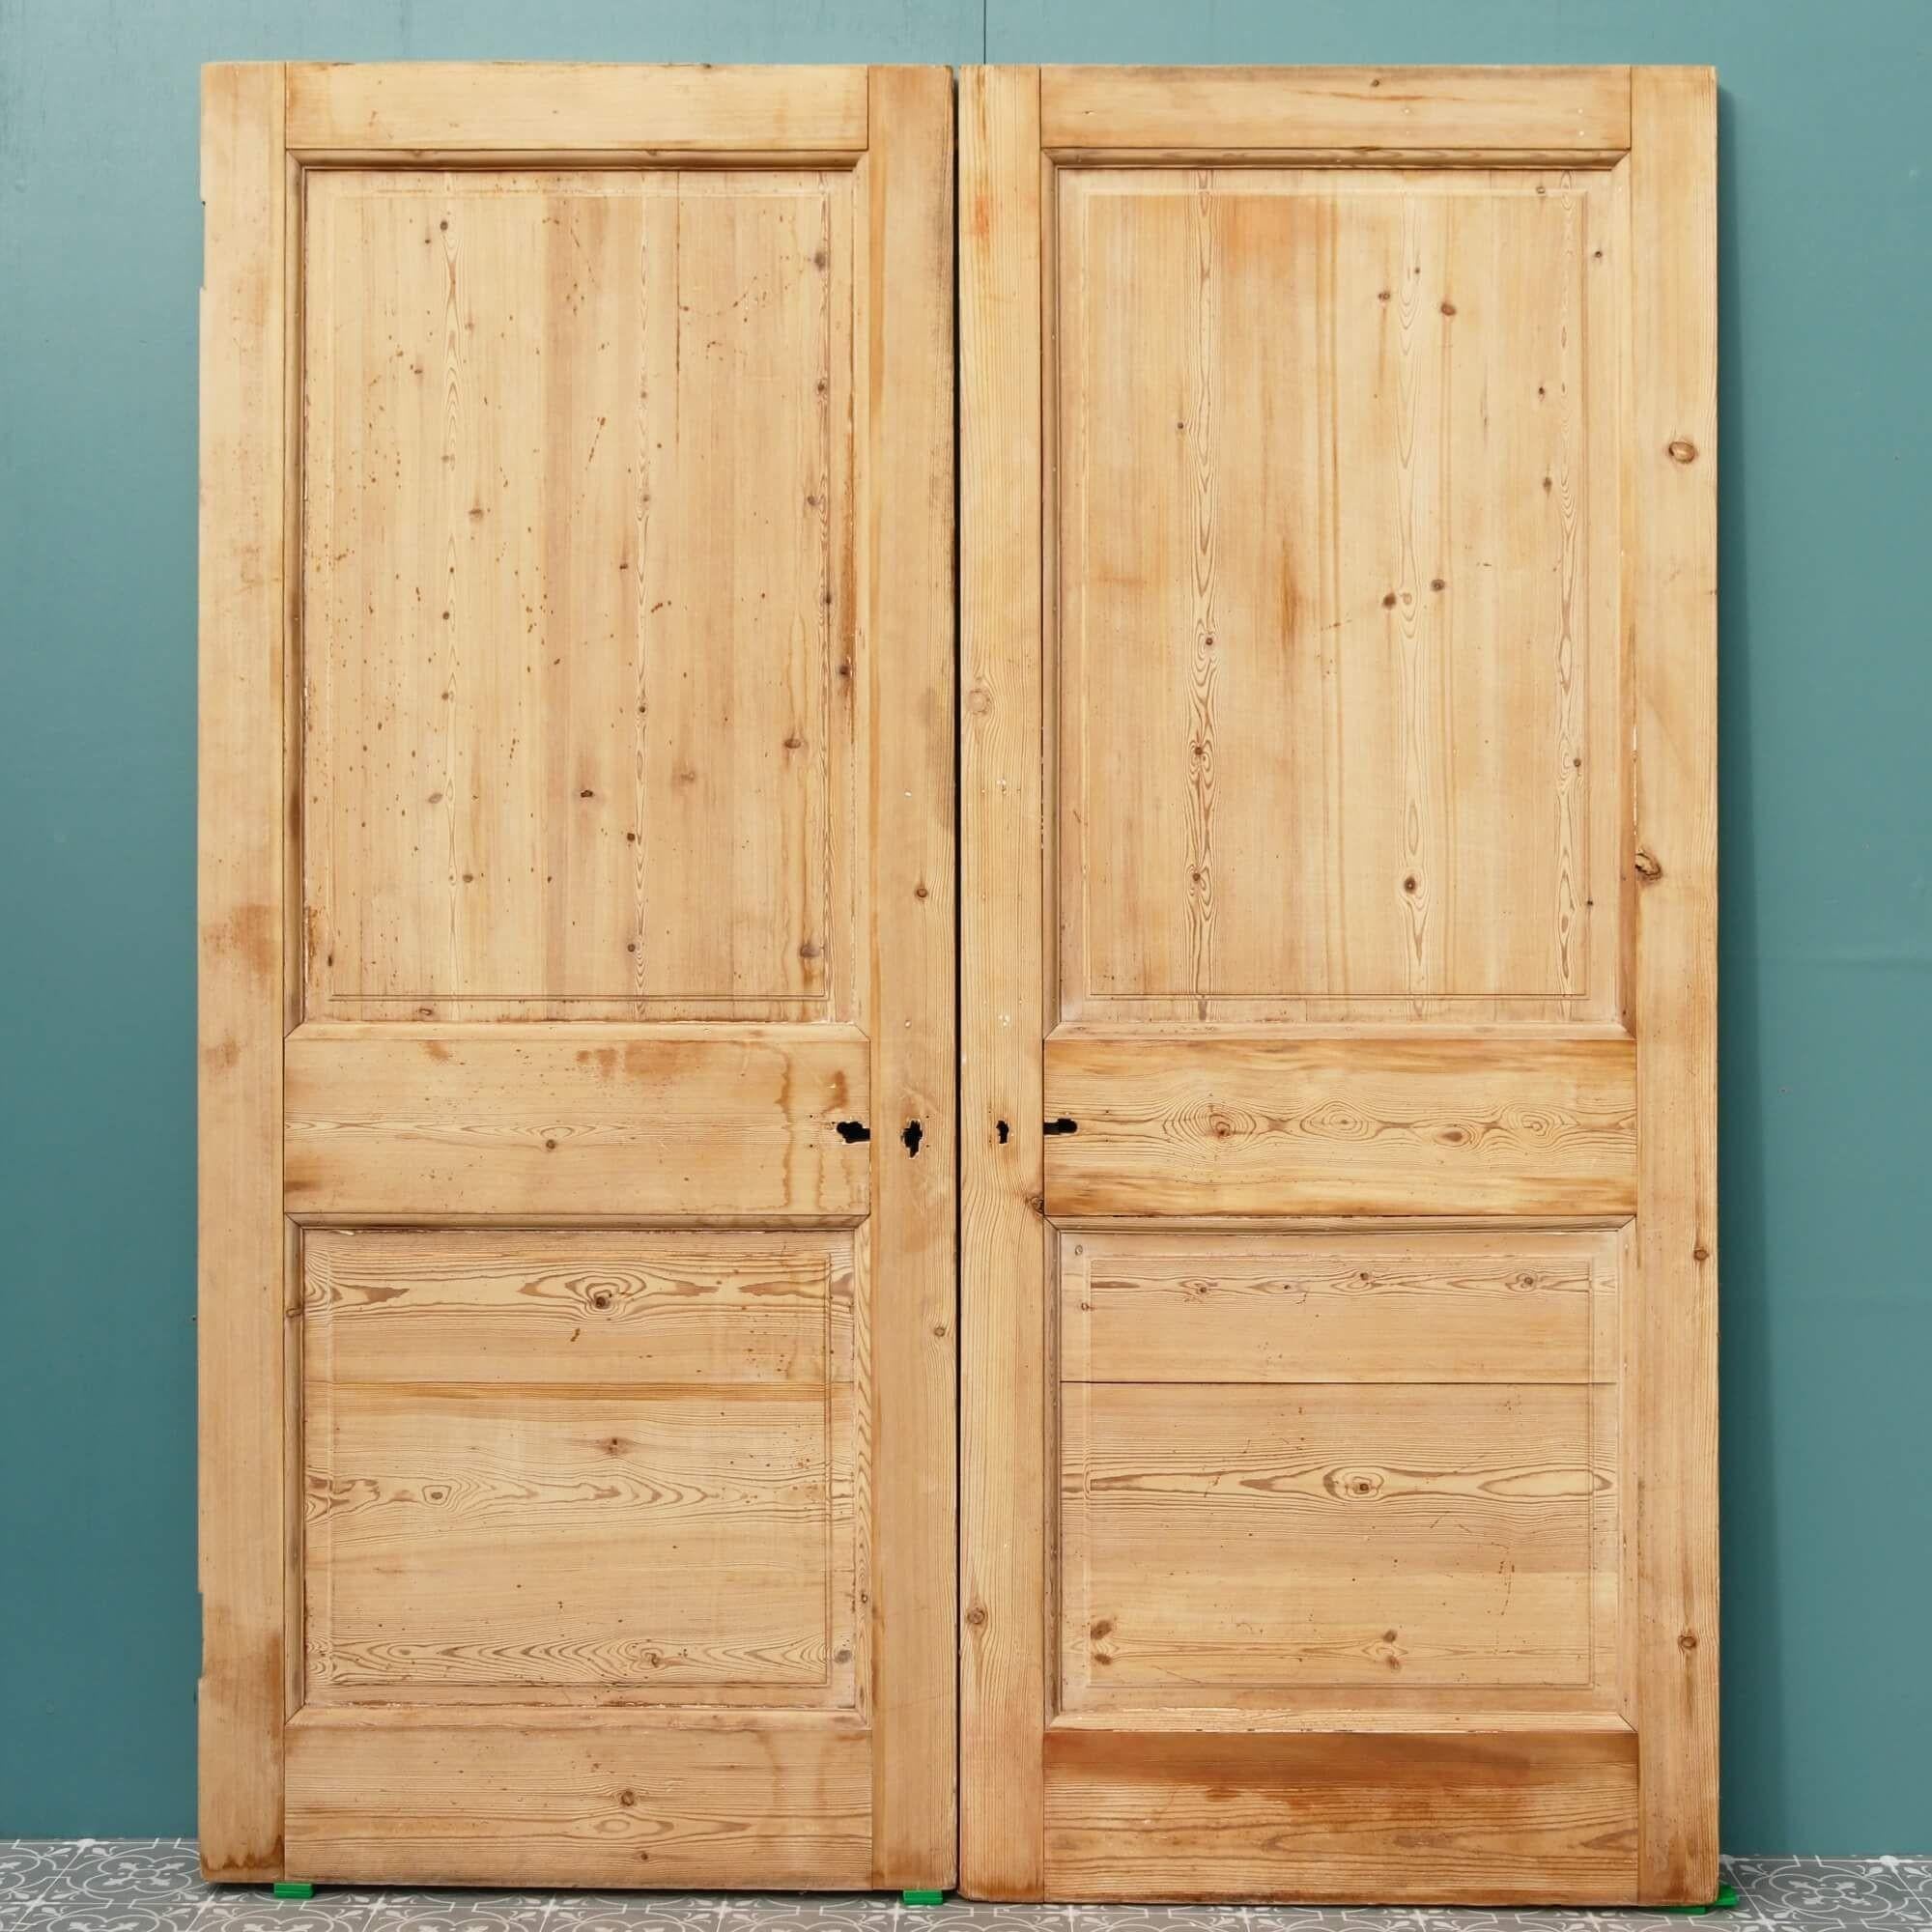 A pair of reclaimed Victorian pine internal double doors dating from the early 20th century. These antique double doors make beautiful set of dividing doors in a period townhouse or traditional cottage. Detailed with smart raised and fielded panels